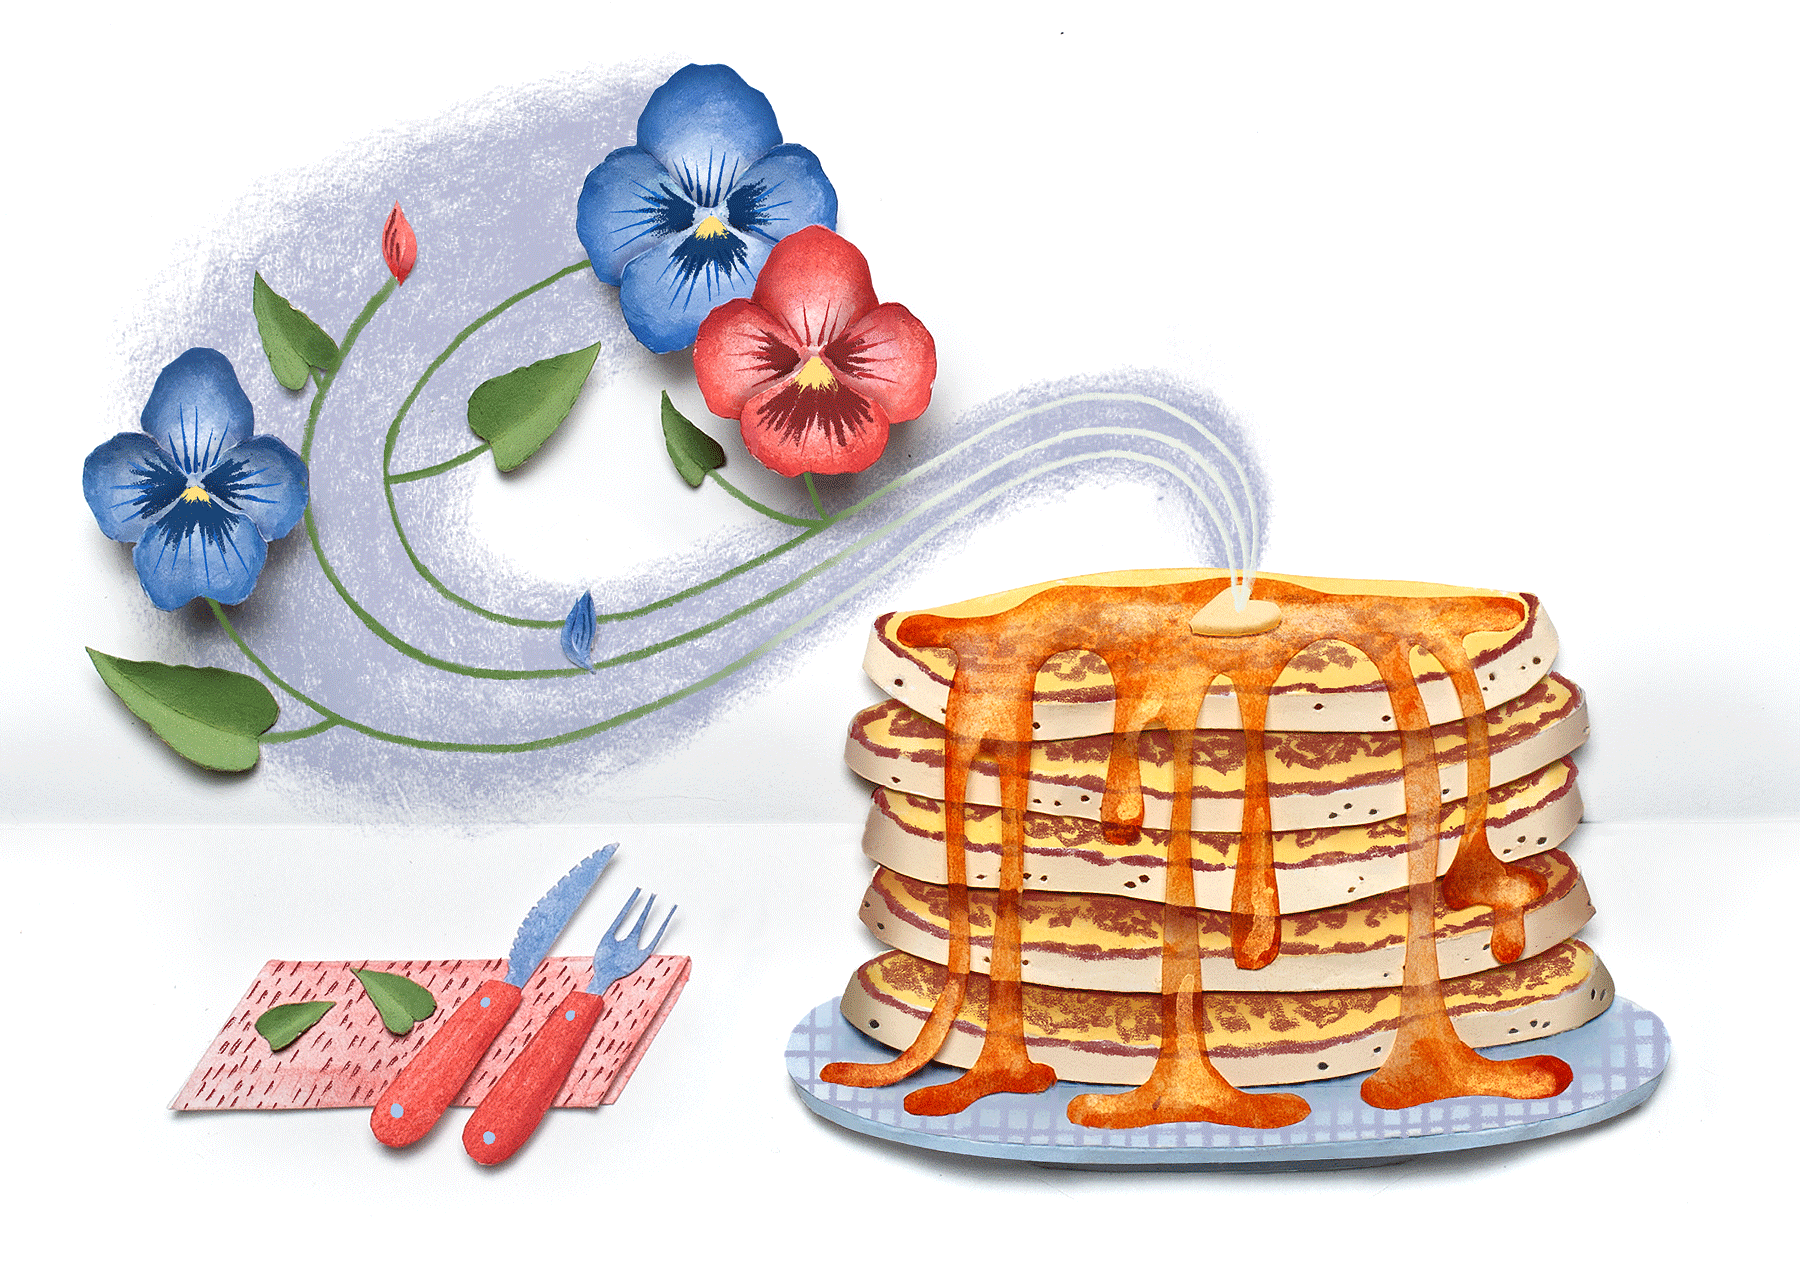 Flowers rise up with the steam from a stack of pancakes.